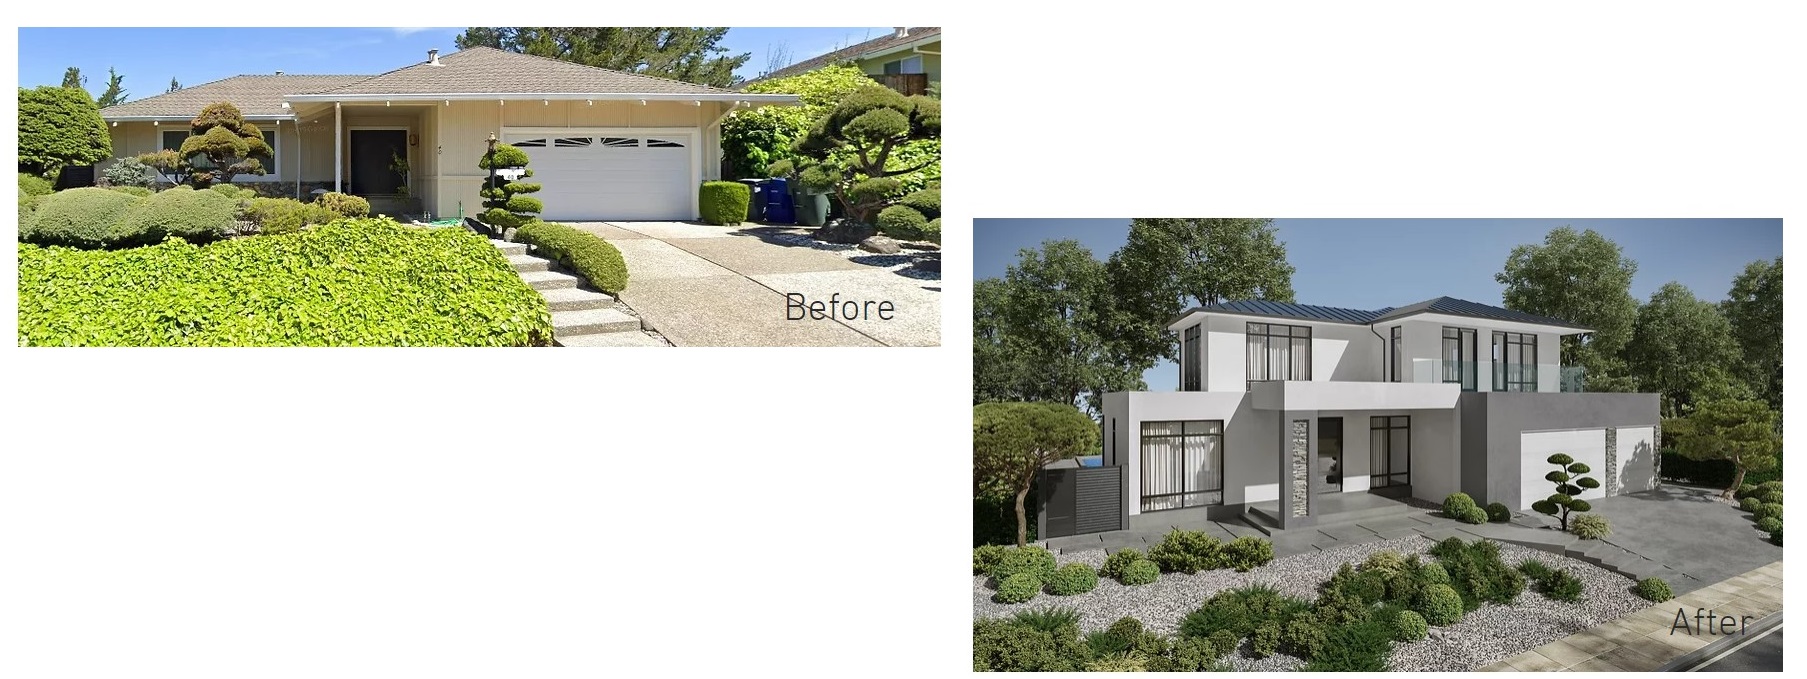 Photo and CGI for an Architectural Renovation Project